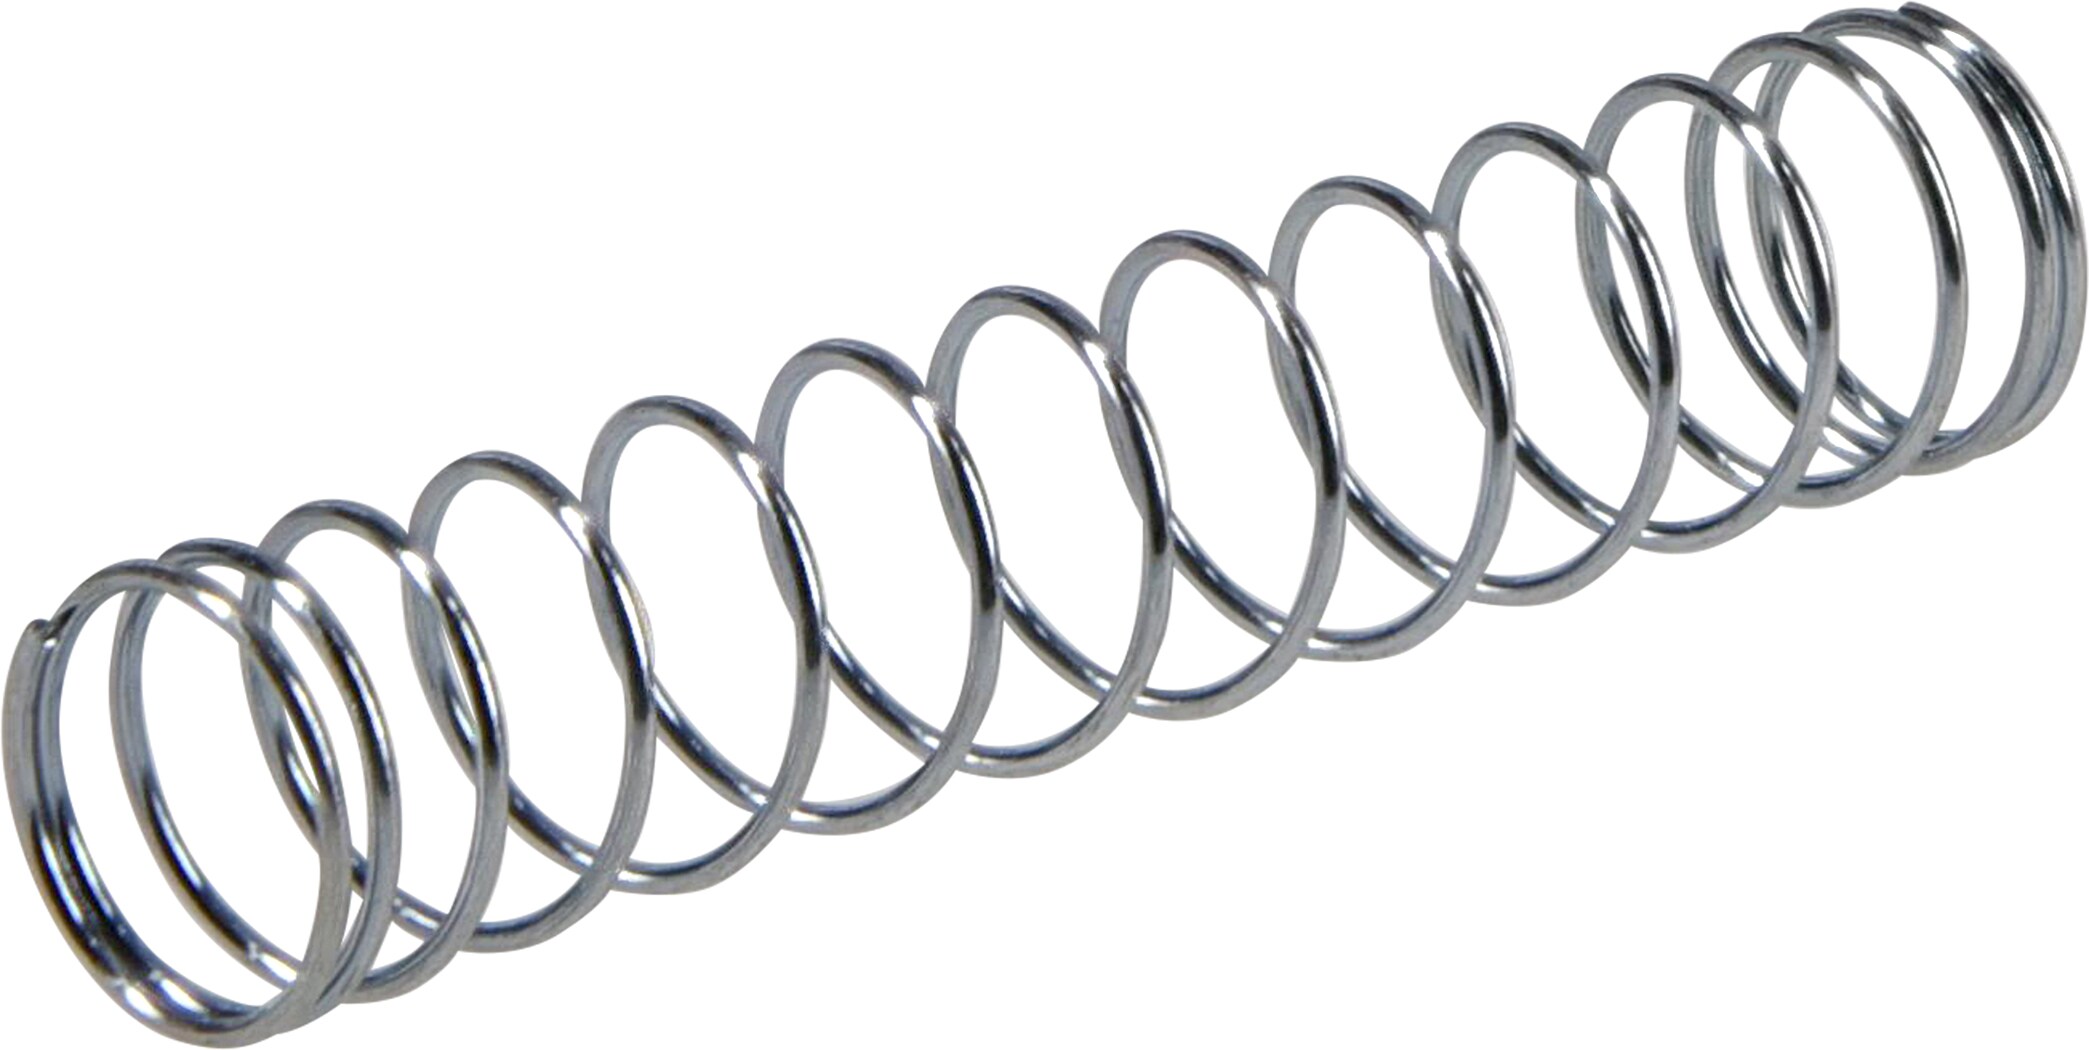 CENTURY SPRING Compression Spring with 1/8 Outer Diameter (6 Pack)